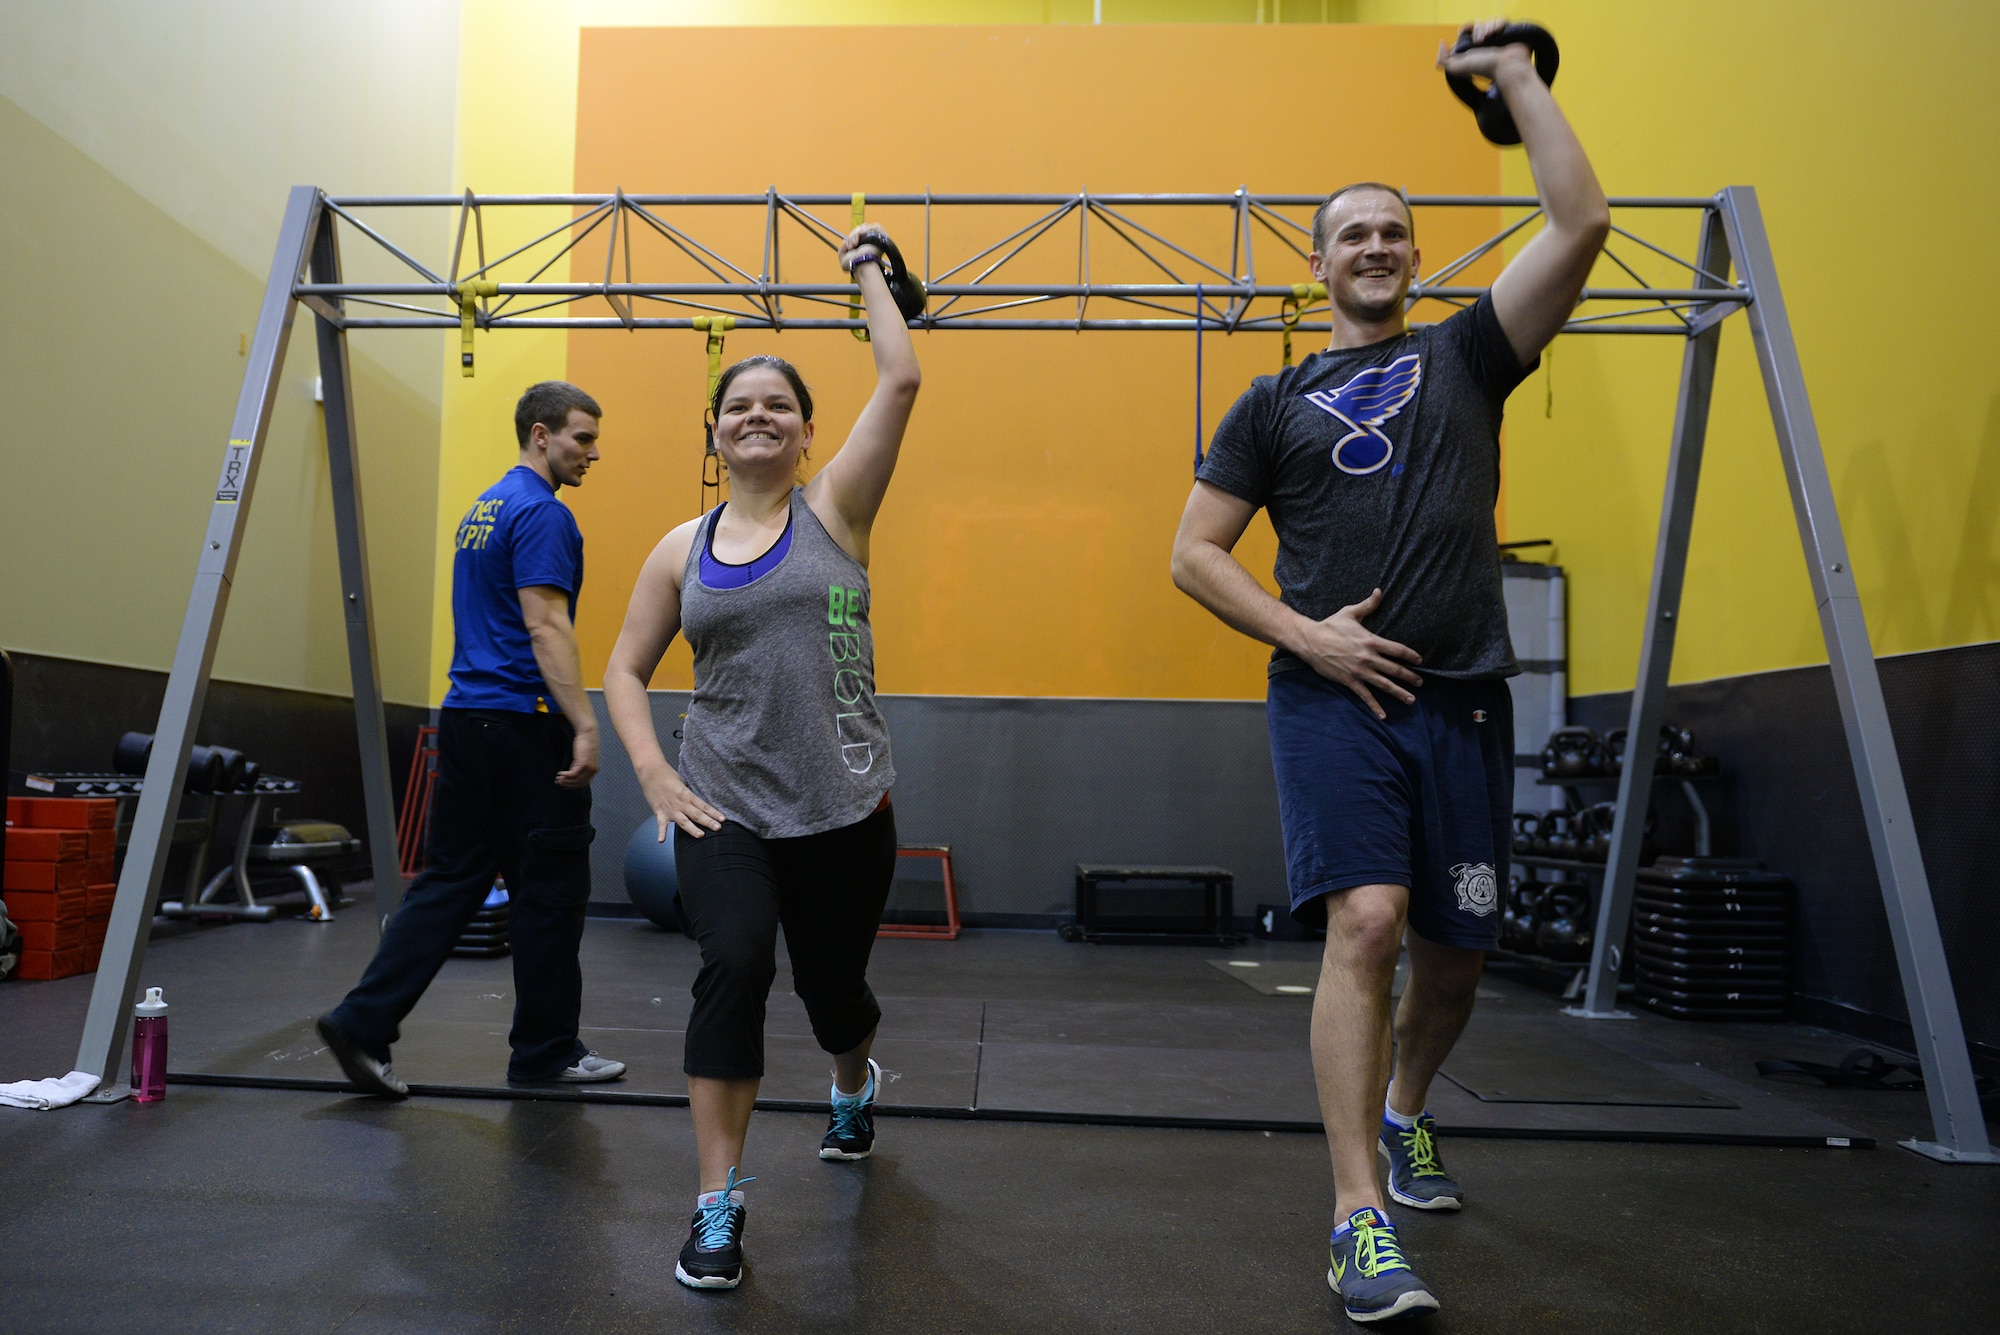 Jessi McNulty, 26, and her husband Staff Sgt. Stephen McNulty, a 375th Civil Engineering Squadron Firefighter, performs kettle bell lunges at their gym, O’Fallon, Ill., Jan. 22, 2015. Jessi has been hitting this gym for nearly two years, during which time she has lost 90 pounds despite having temporal lobe epilepsy. Generally her workouts are total-body-oriented and her and her personal trainer monitors her heart rate to mitigate her seizures, which are exercise-induced. (U.S. Air Force photo by Airman 1st Class Erica Crossen)